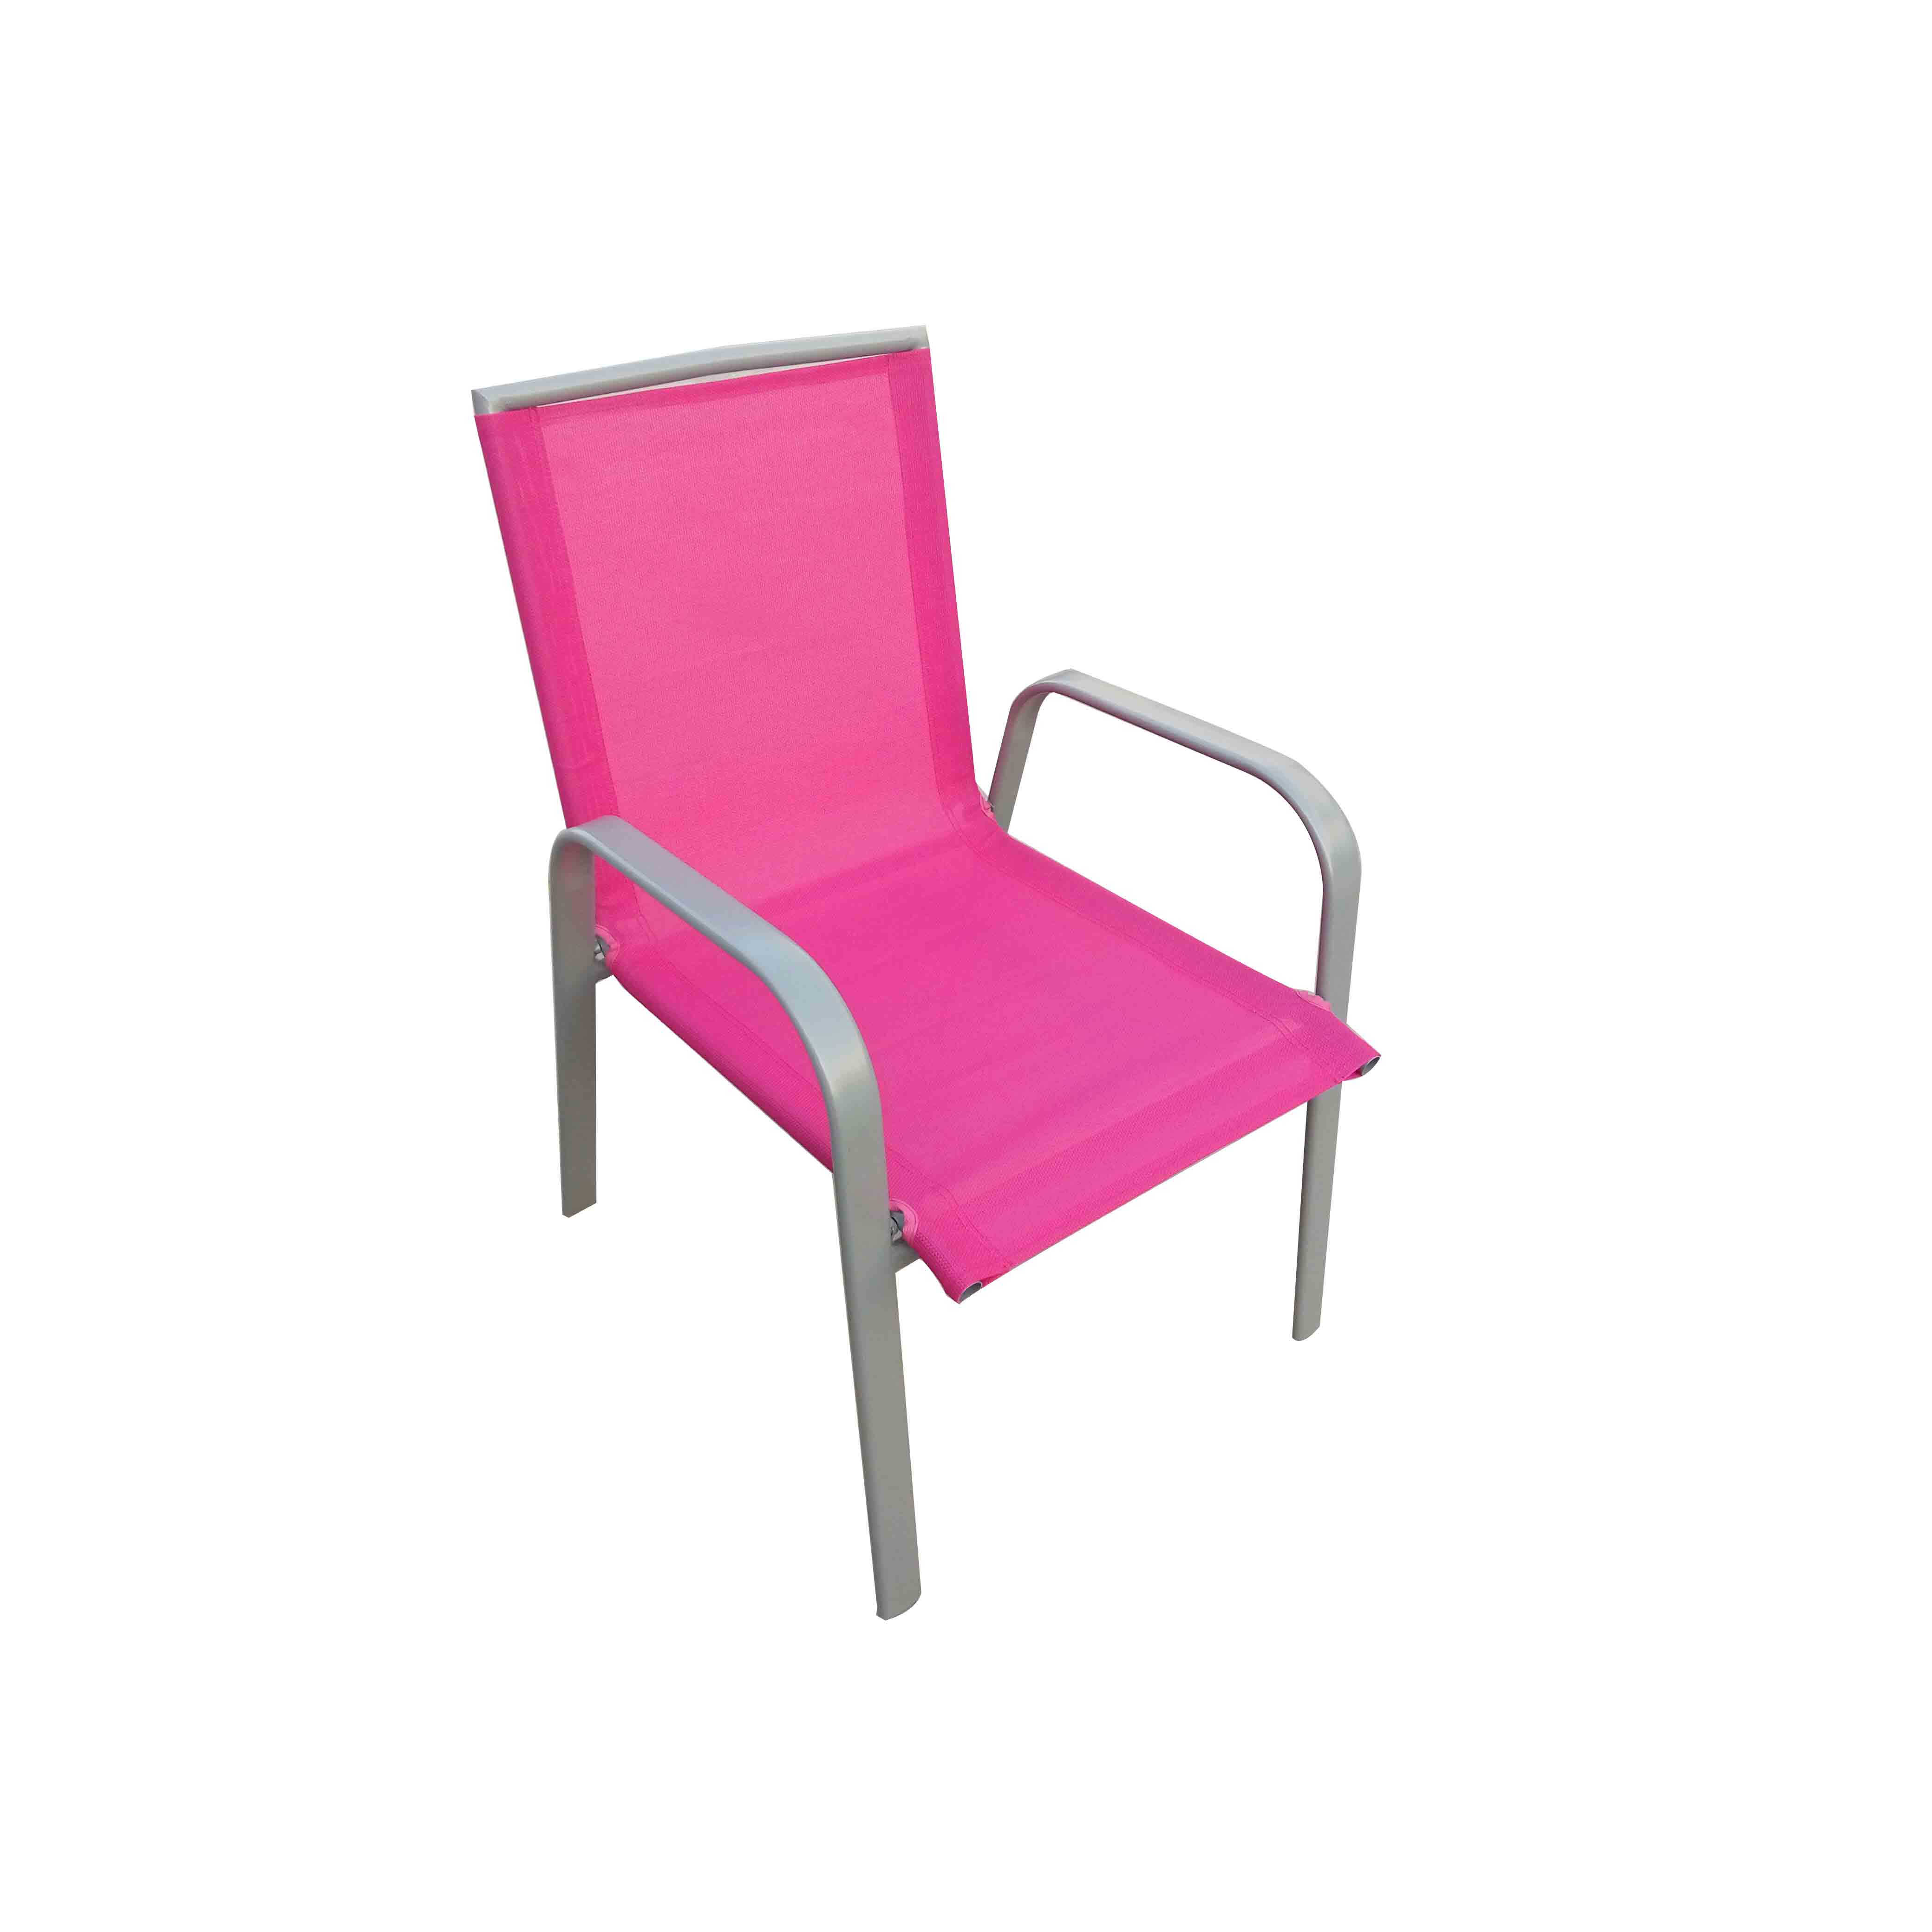 China Manufacturer for Outdoor Corner Couch - JJ302C-Fuscia Kid’s steel textilene stacking chair – Jin-jiang Industry